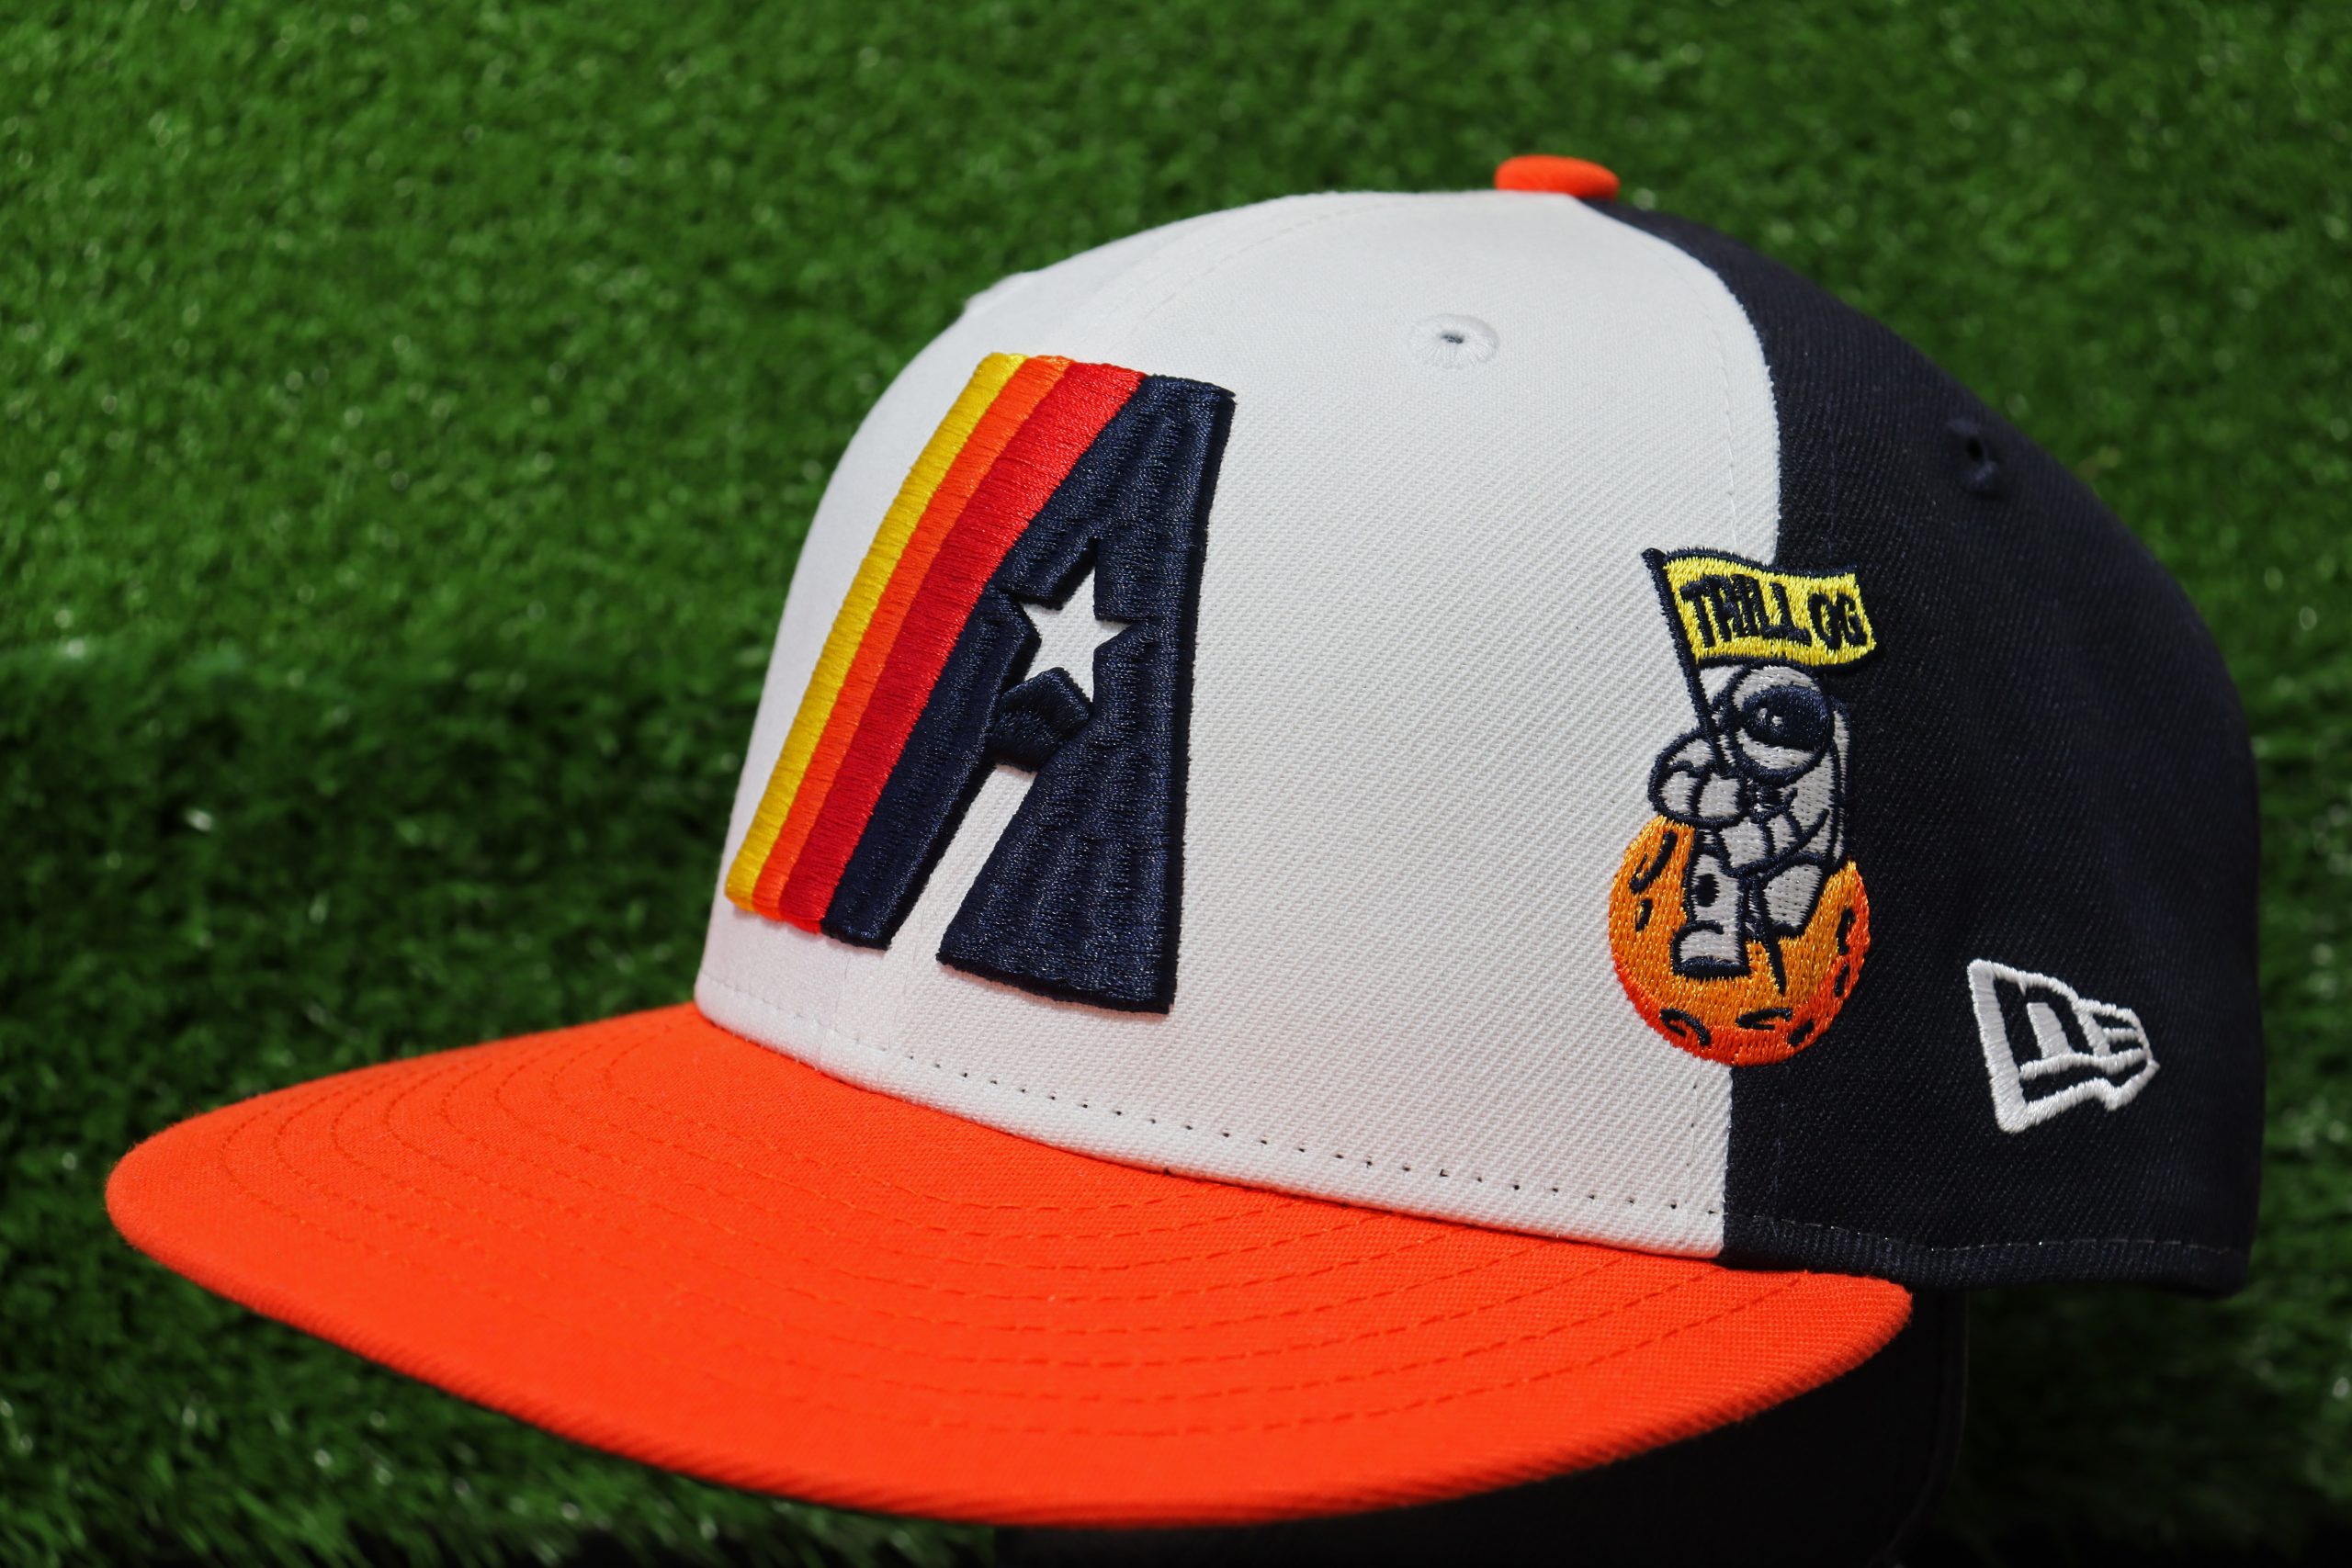 Celebrate Houston's 713 Day with Bun B's new Astros hats, special